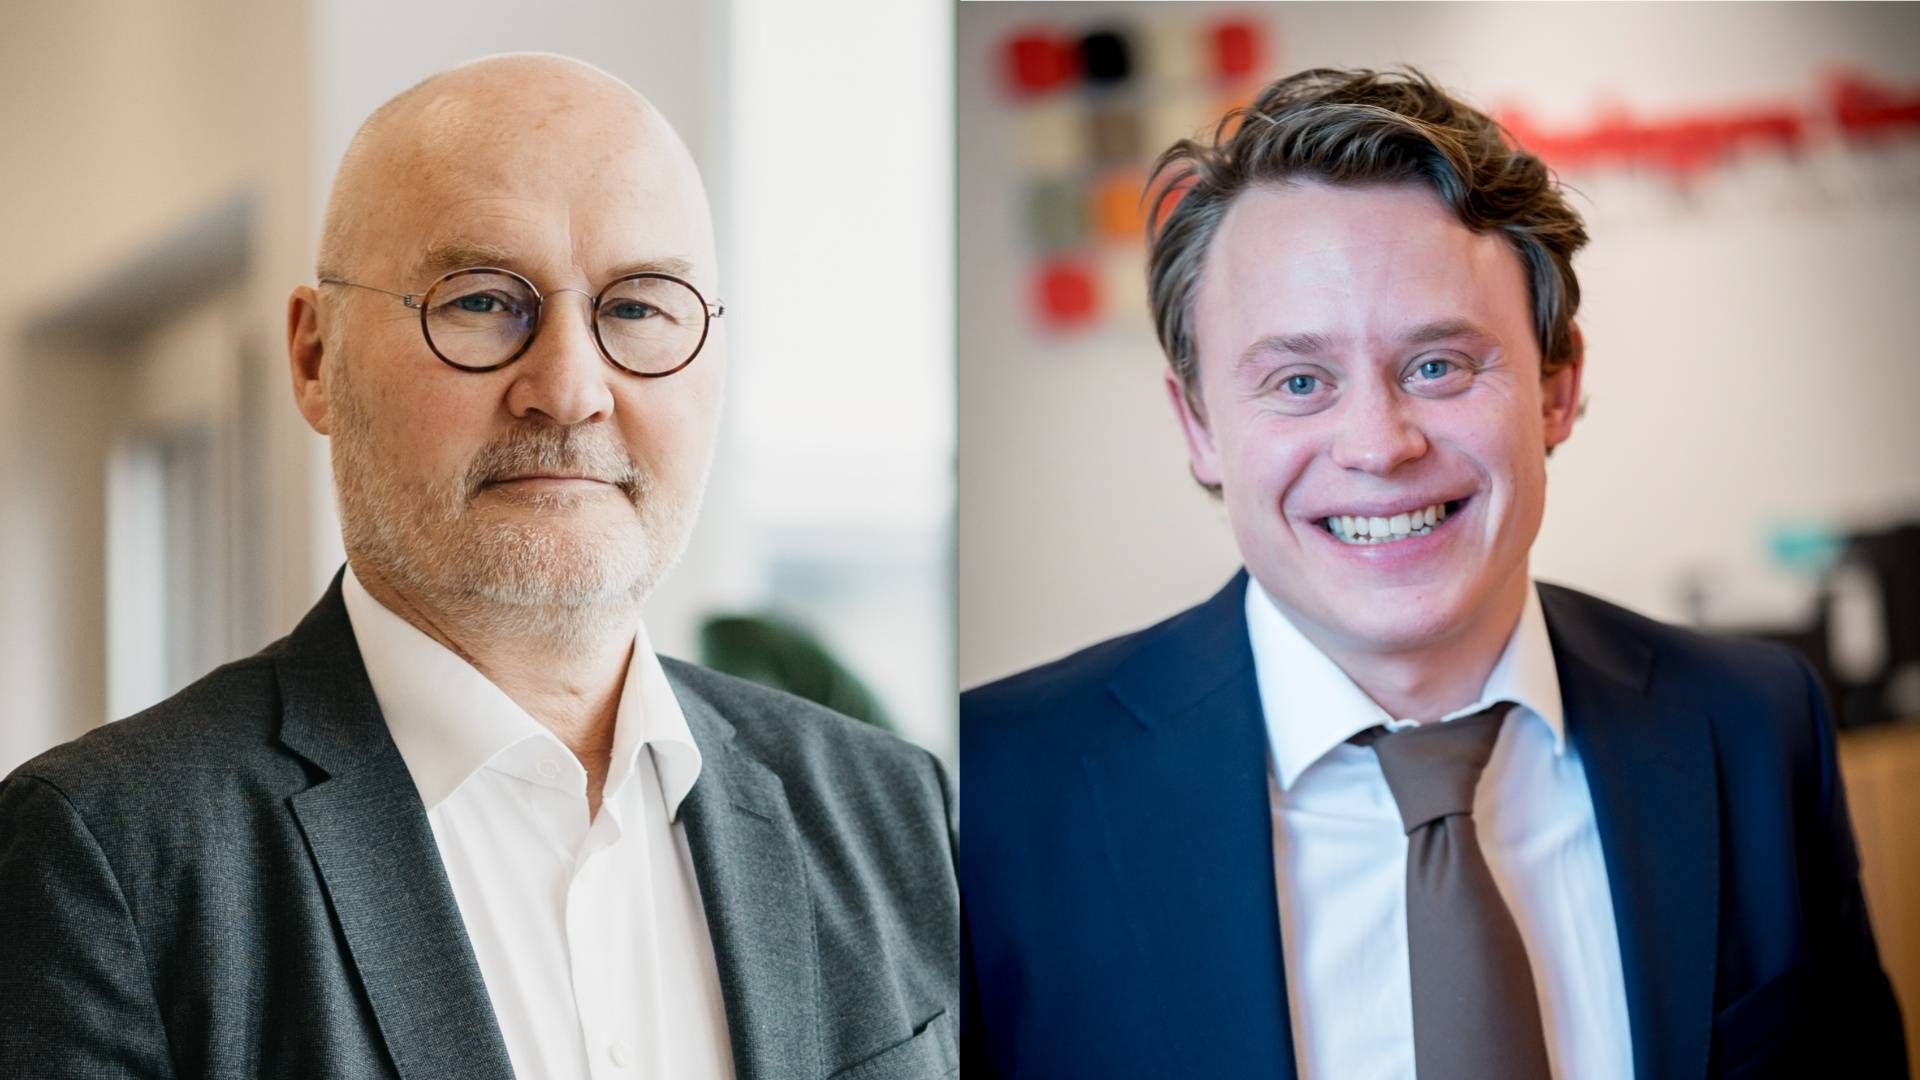 Bernt S. Zakariassen, CEO of the Norwegian Fund and Asset Management Association and Fredrik Hård, economist at the Swedish Investment Fund Association. | Photo: PR / Norwegian Fund And Asset Management Association and Swedish Investment Fund Association